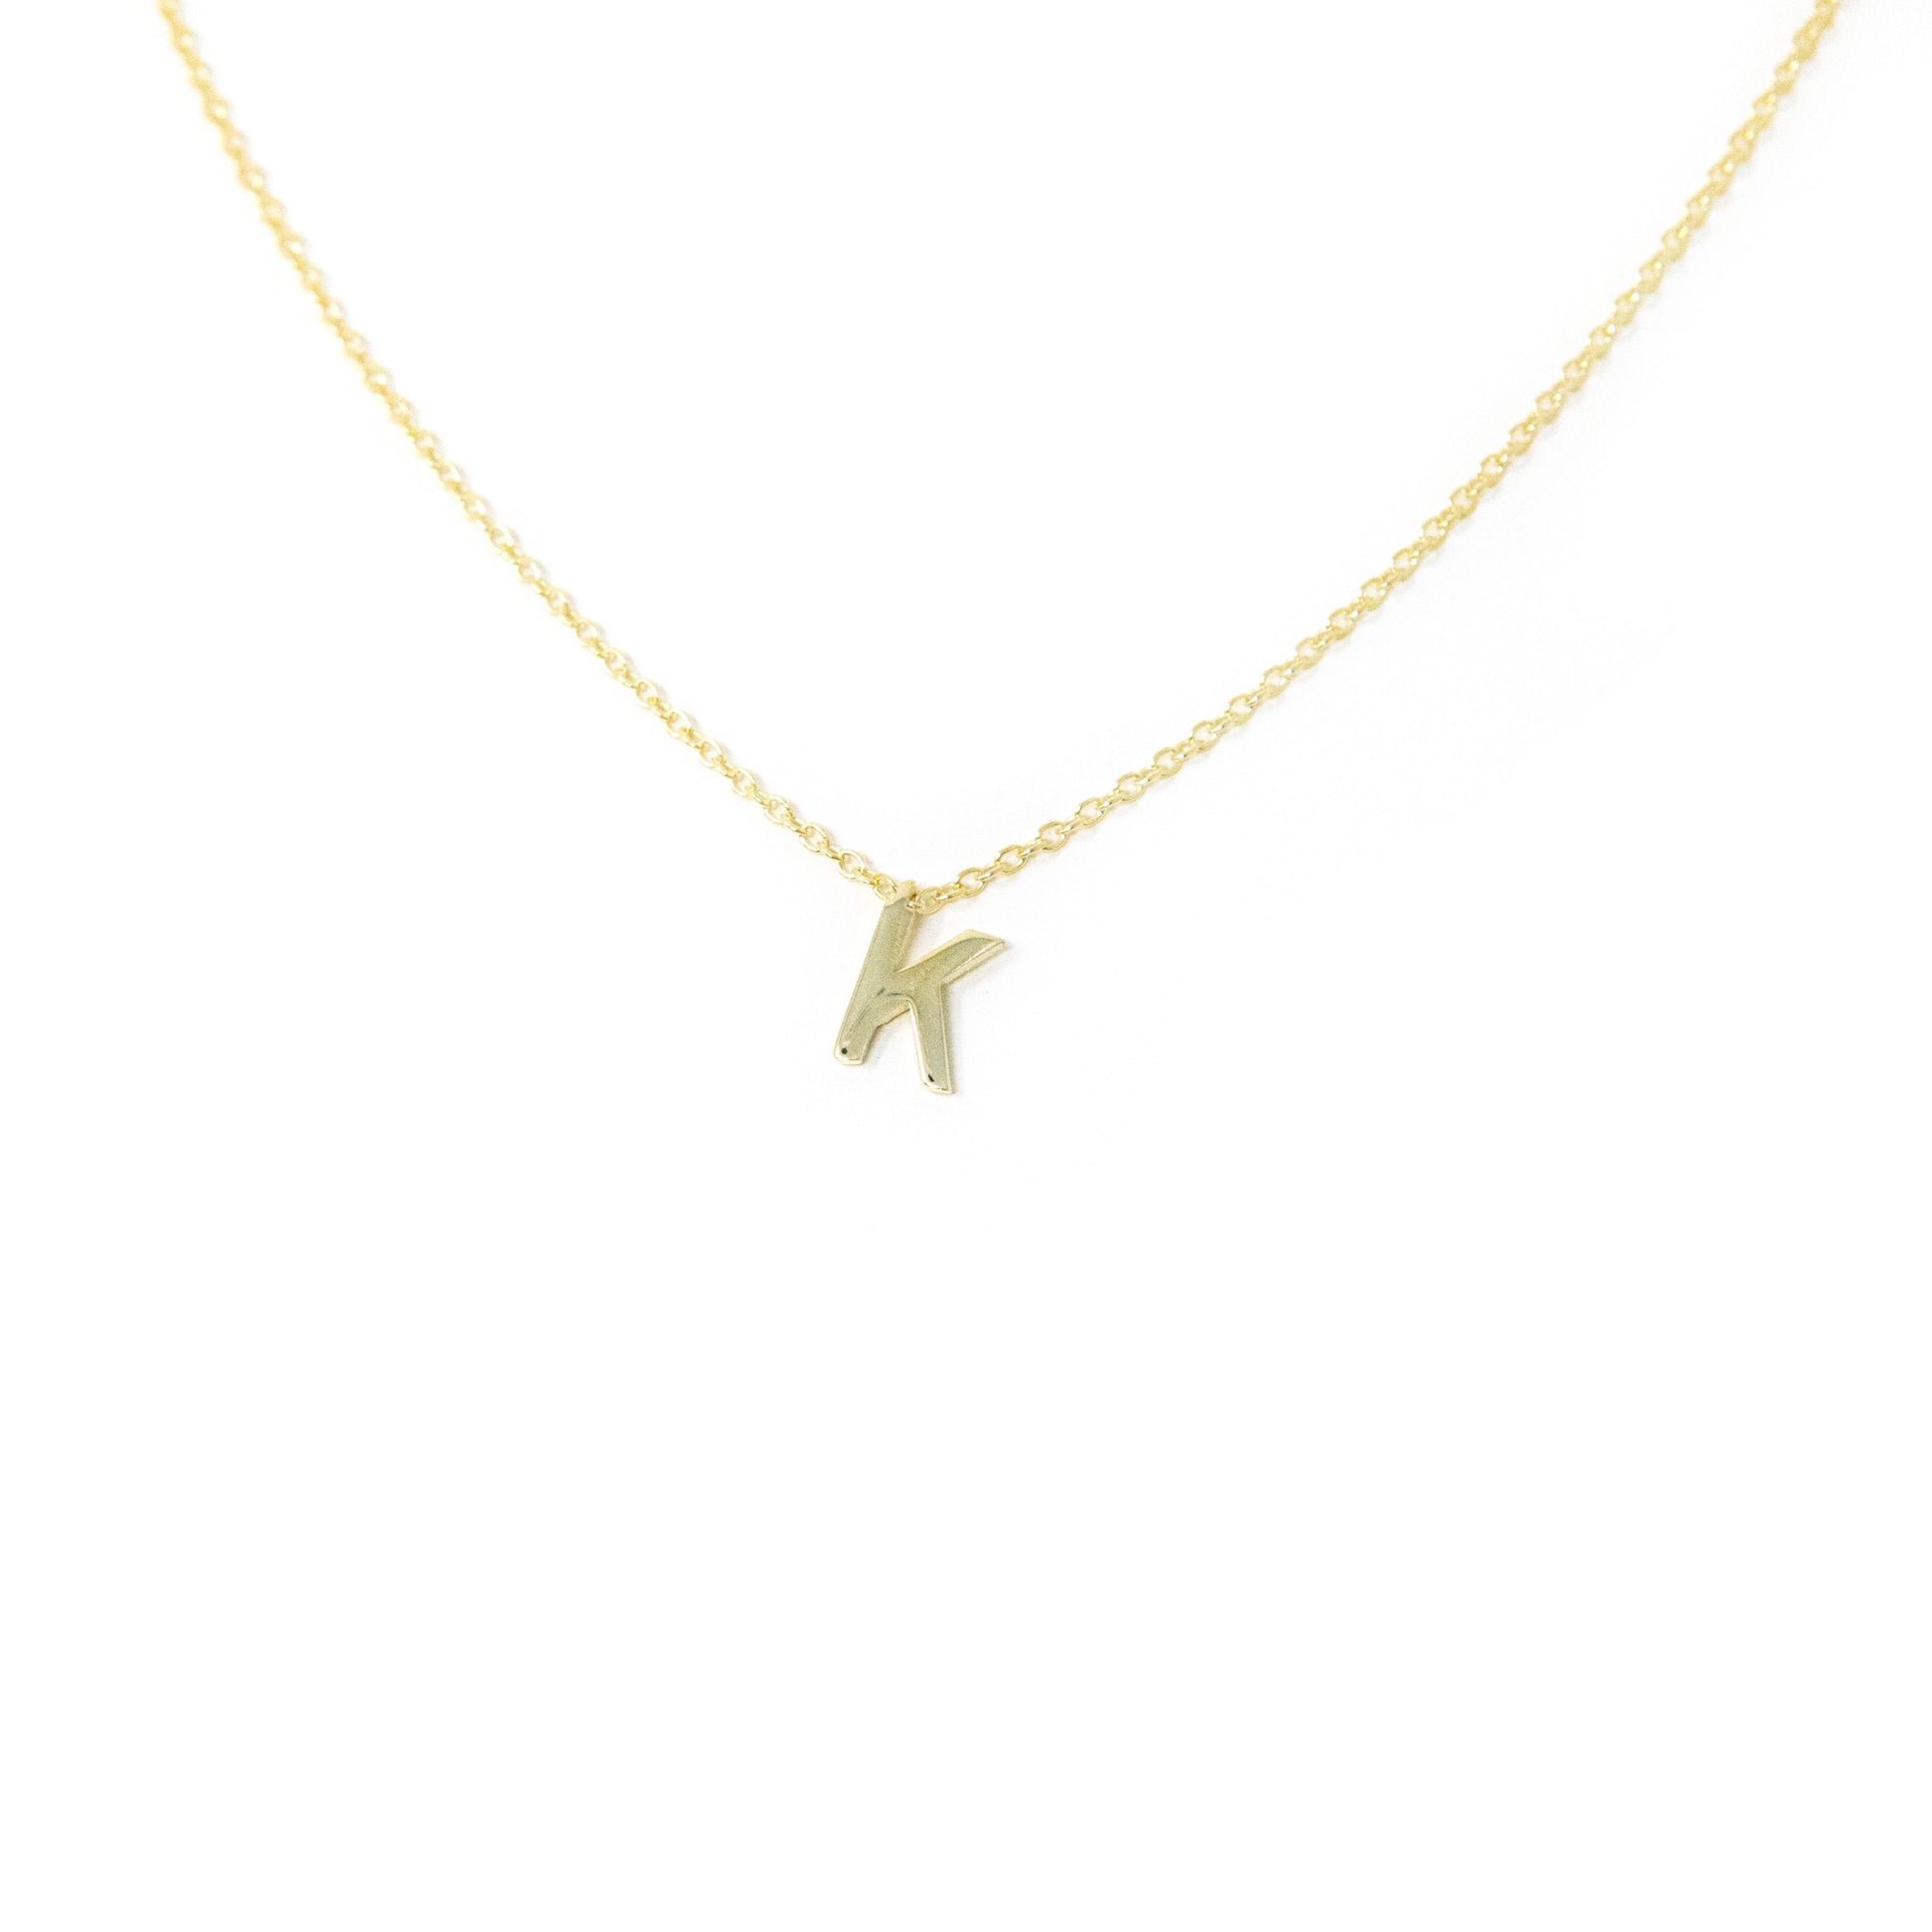 Gold Paperclip Chain Initial Necklace | 18 Paperclip Chain | Personalized Necklace | The Sis Kiss Jewelry